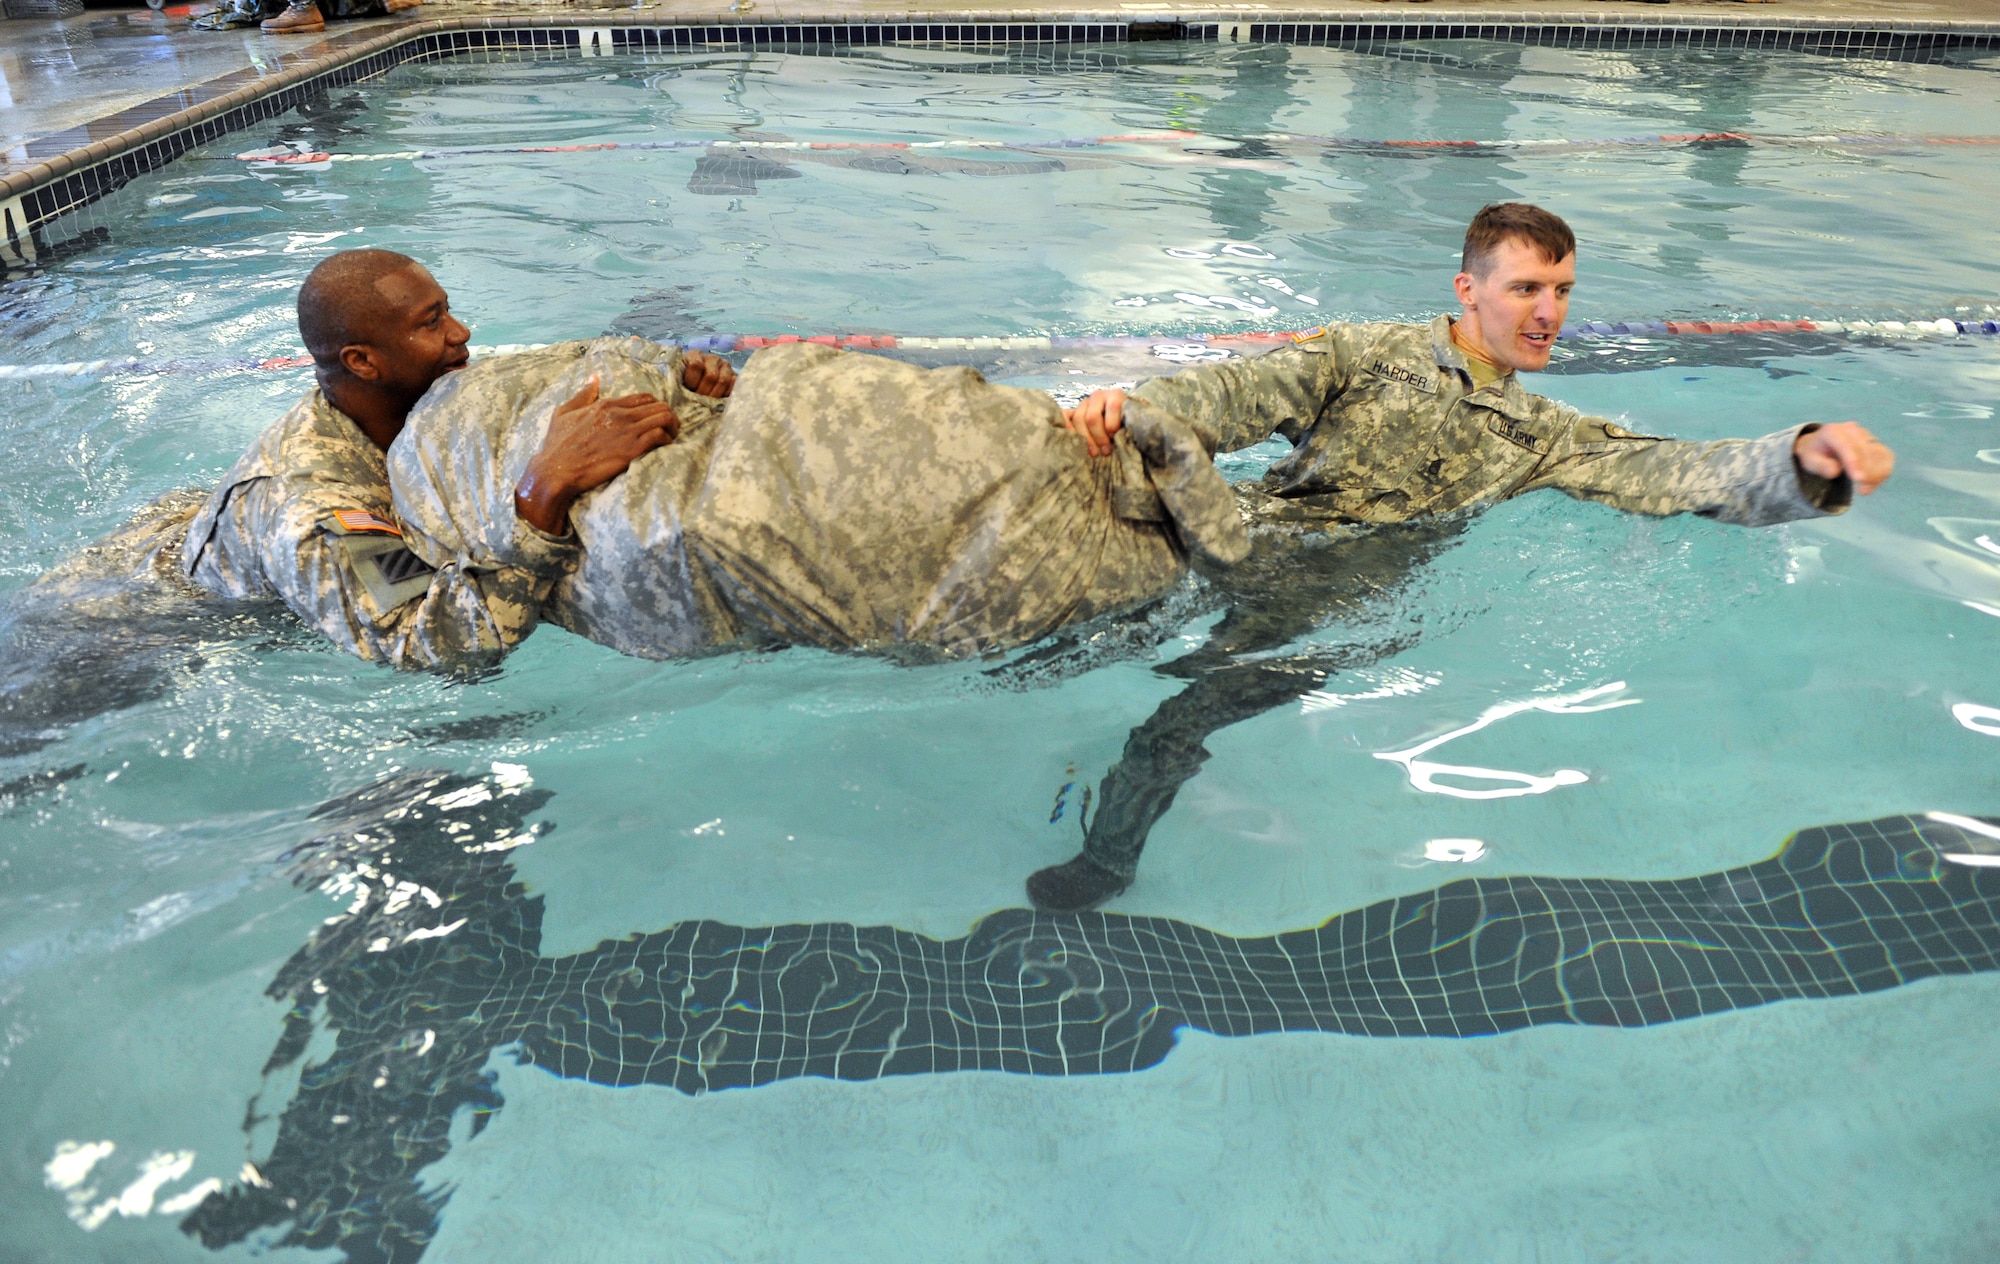 Sergeant 1st Class George Simms (left) and Staff Sgt. Eric Harder (right), Airborne Target Surveillance supervisors, use a poncho raft to move through the pool at the base fitness center on March 14. (U.S. Air Force photo by Tommie Horton)